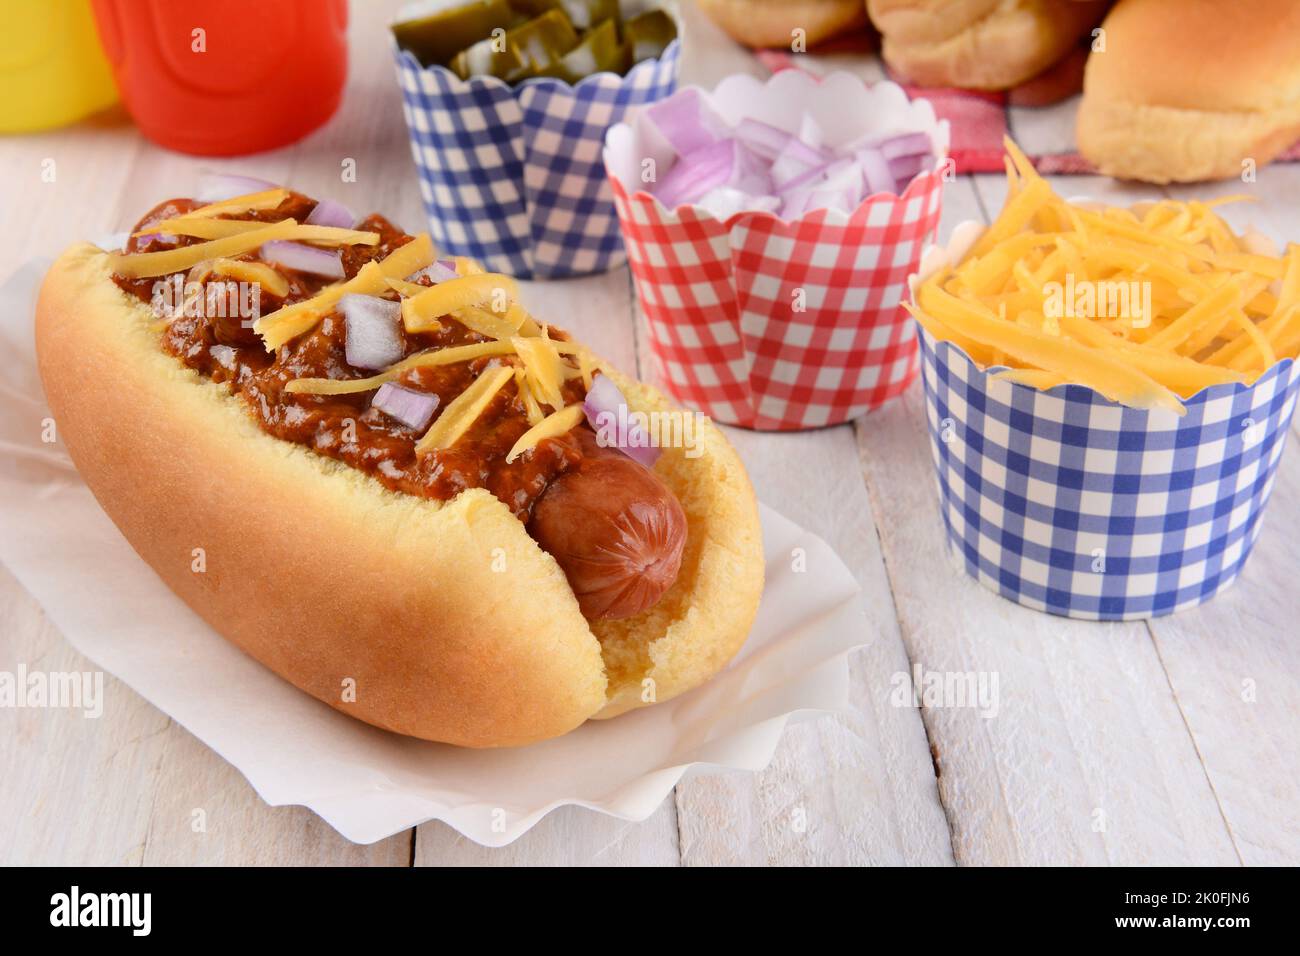 Closeup of a grilled chili dog with cheese and onions on a rustic wood picnic table. More buns and condiments fill the background. Stock Photo